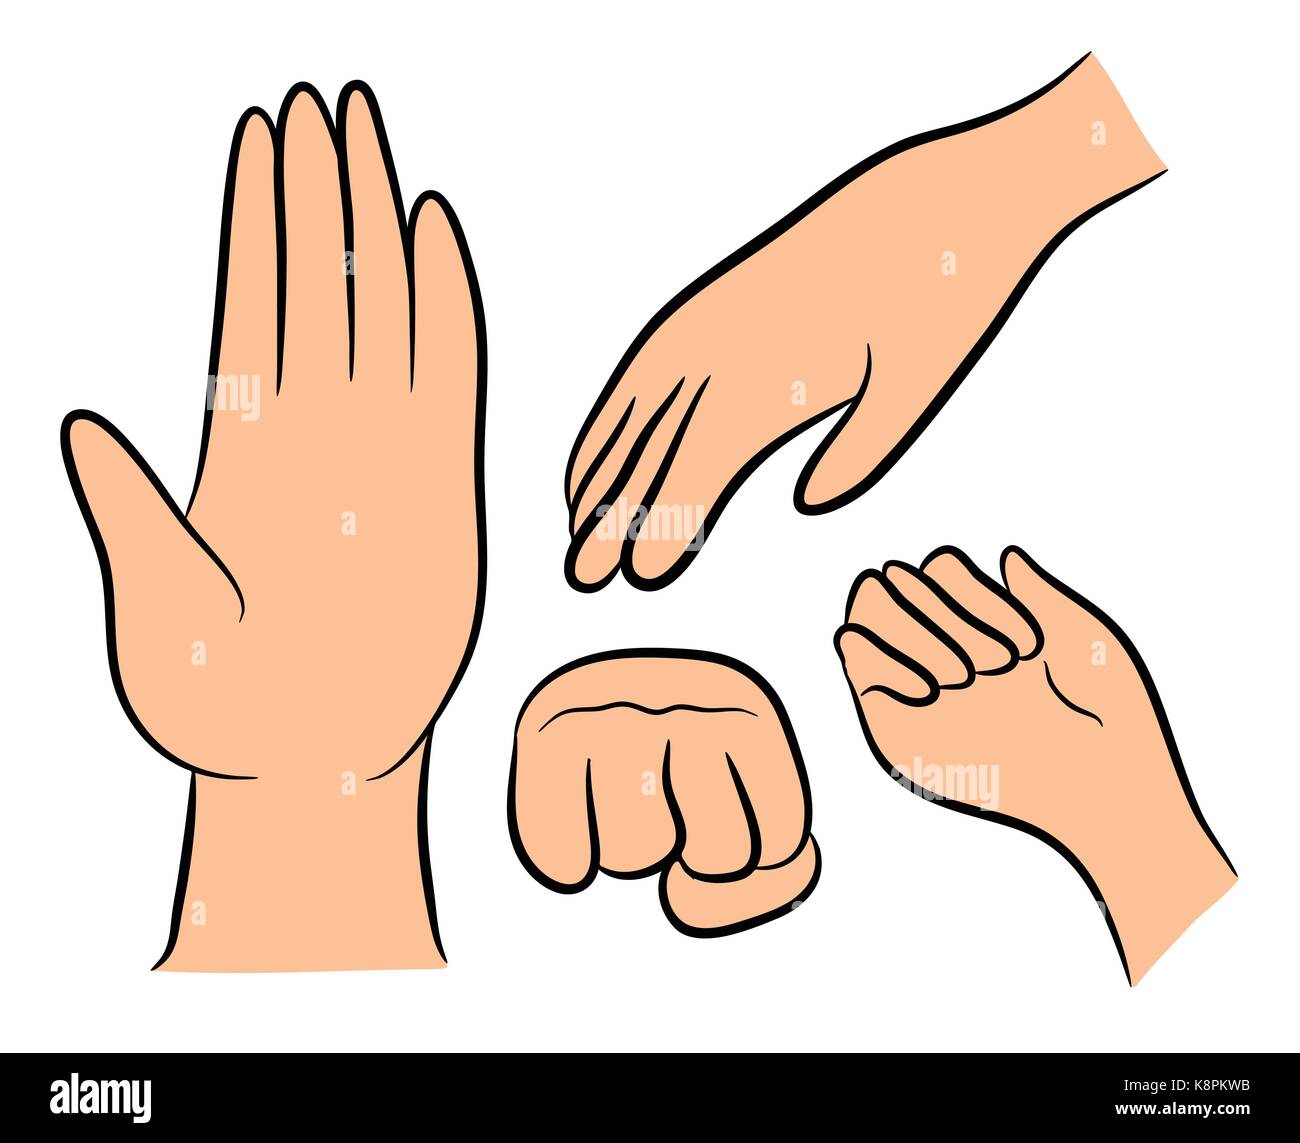 Image of cartoon human hand gesture set. Vector illustration isolated on white background. Stock Vector